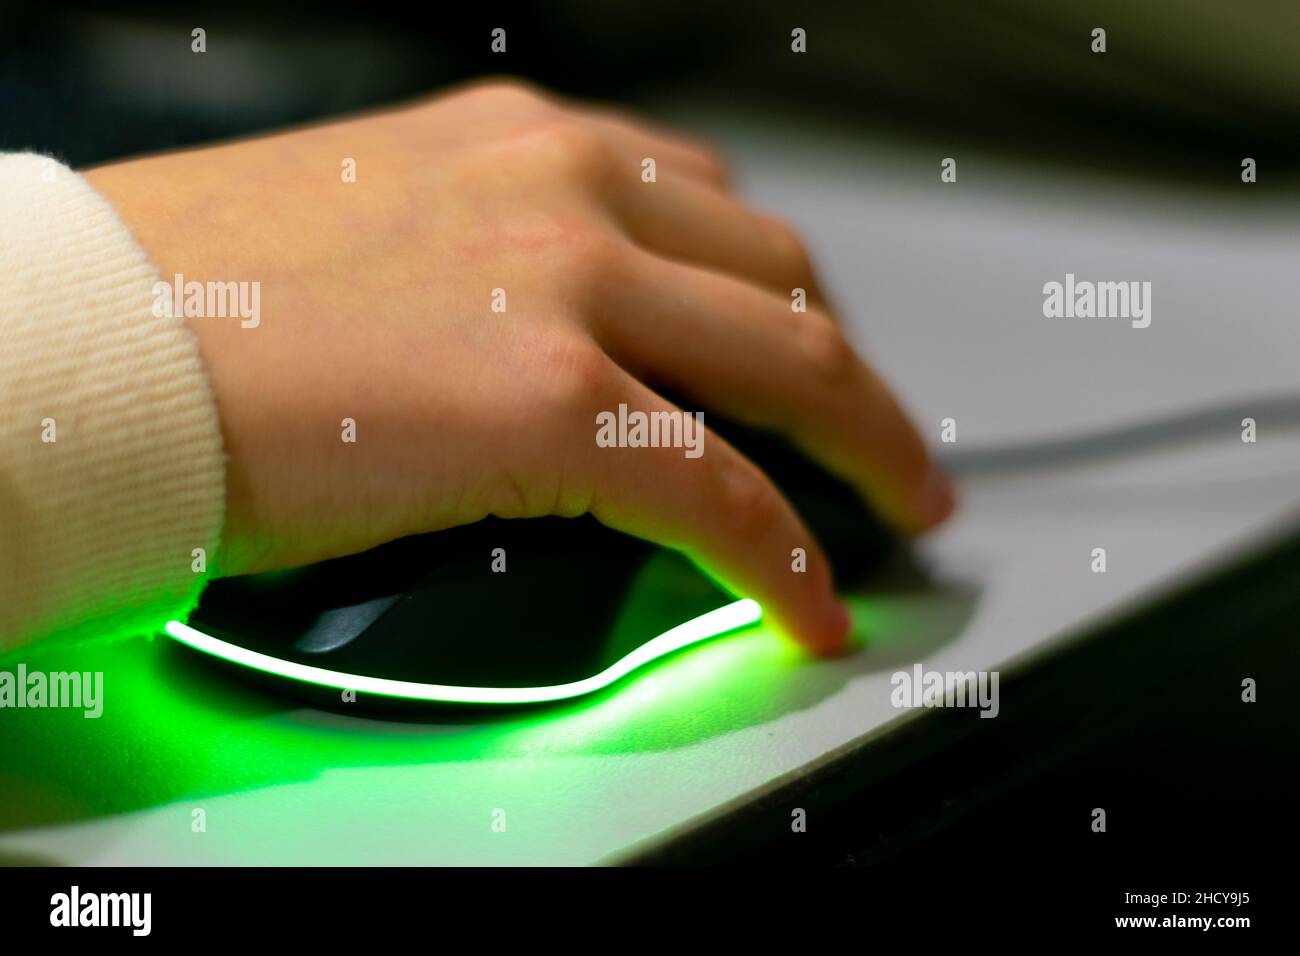 Kids playing computer games, hand holding gaming colorful mouse with green light. Stock Photo